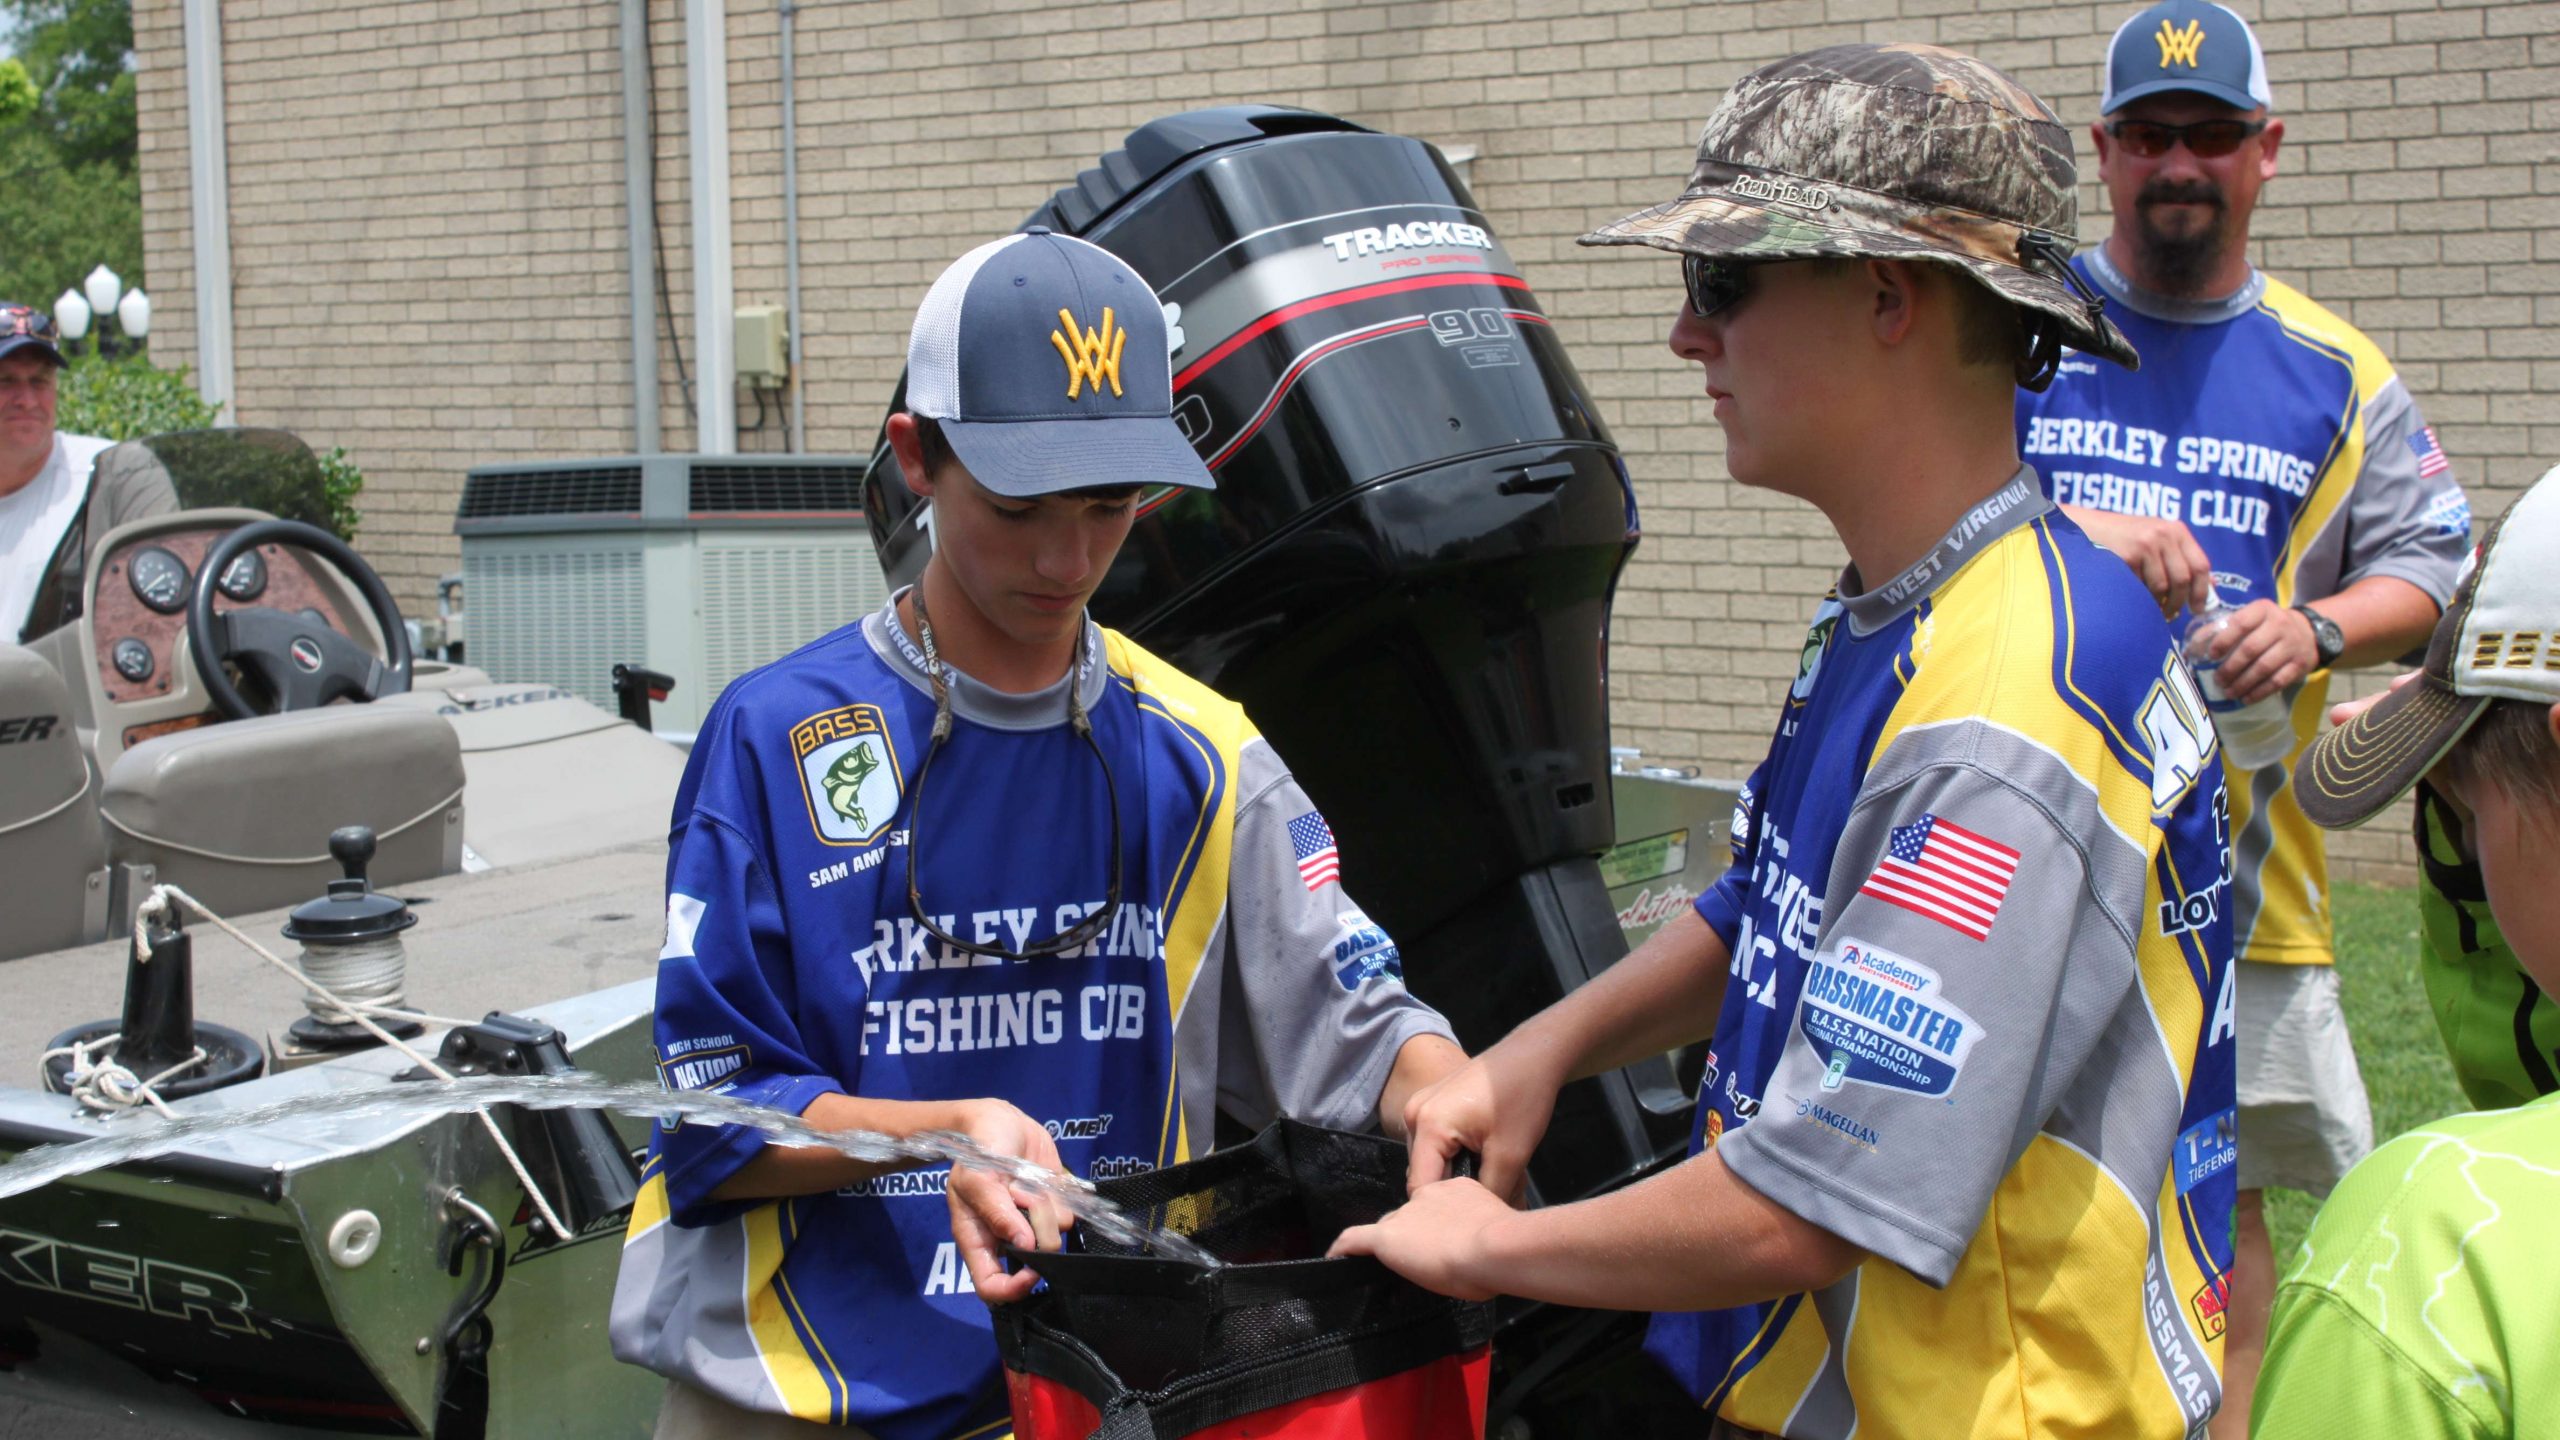 Team West Virginia makes good use of a bilge pump for their catch.